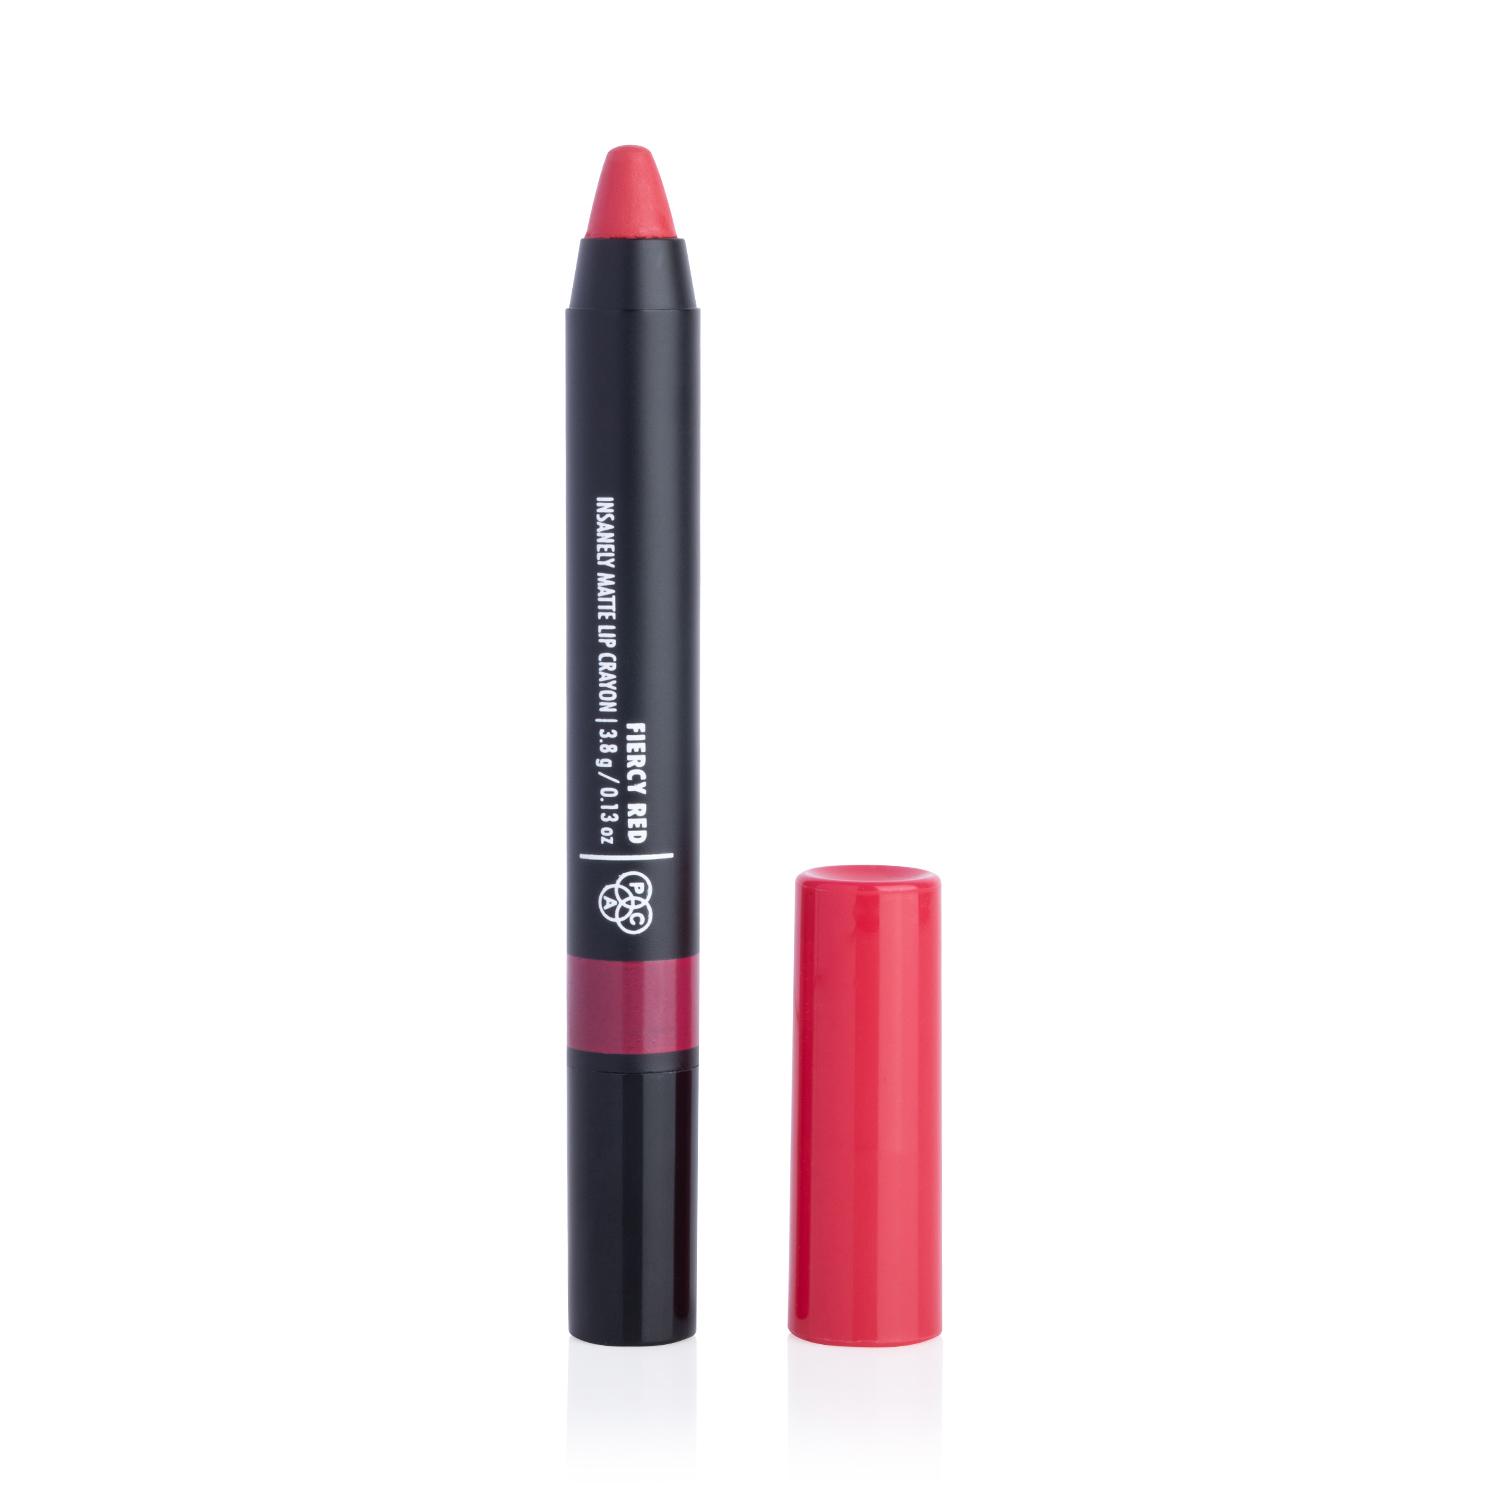 PAC Insanely Matte Lip Crayon - Fiercy Red (3.8g)